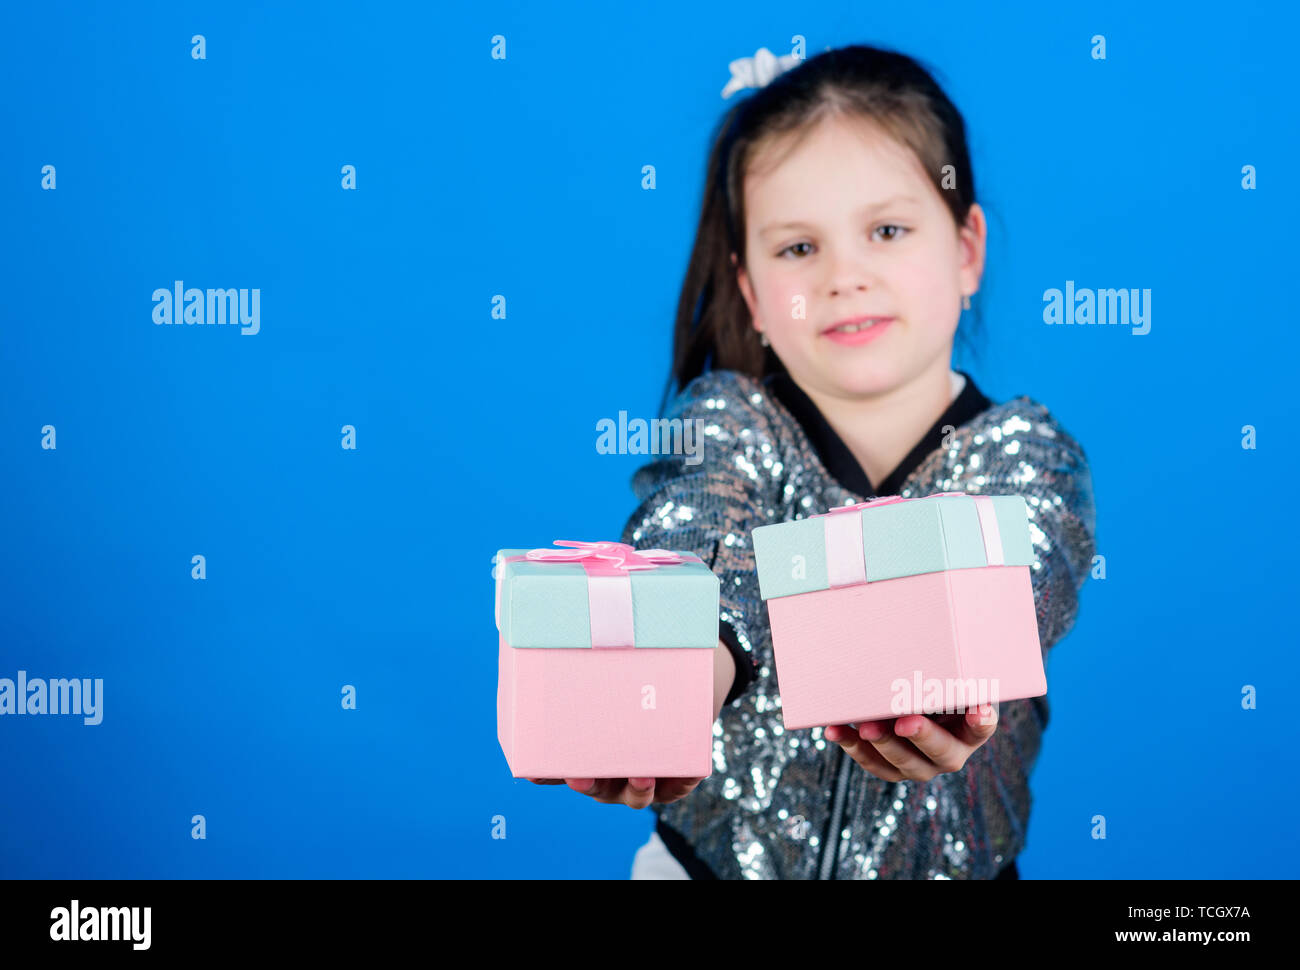 Shopping day. Cute child carry gift boxes. Surprise gift box. Birthday wish list. World of happiness. Special happens every day. Choose one. Girl with gift boxes blue background. Black friday. Stock Photo